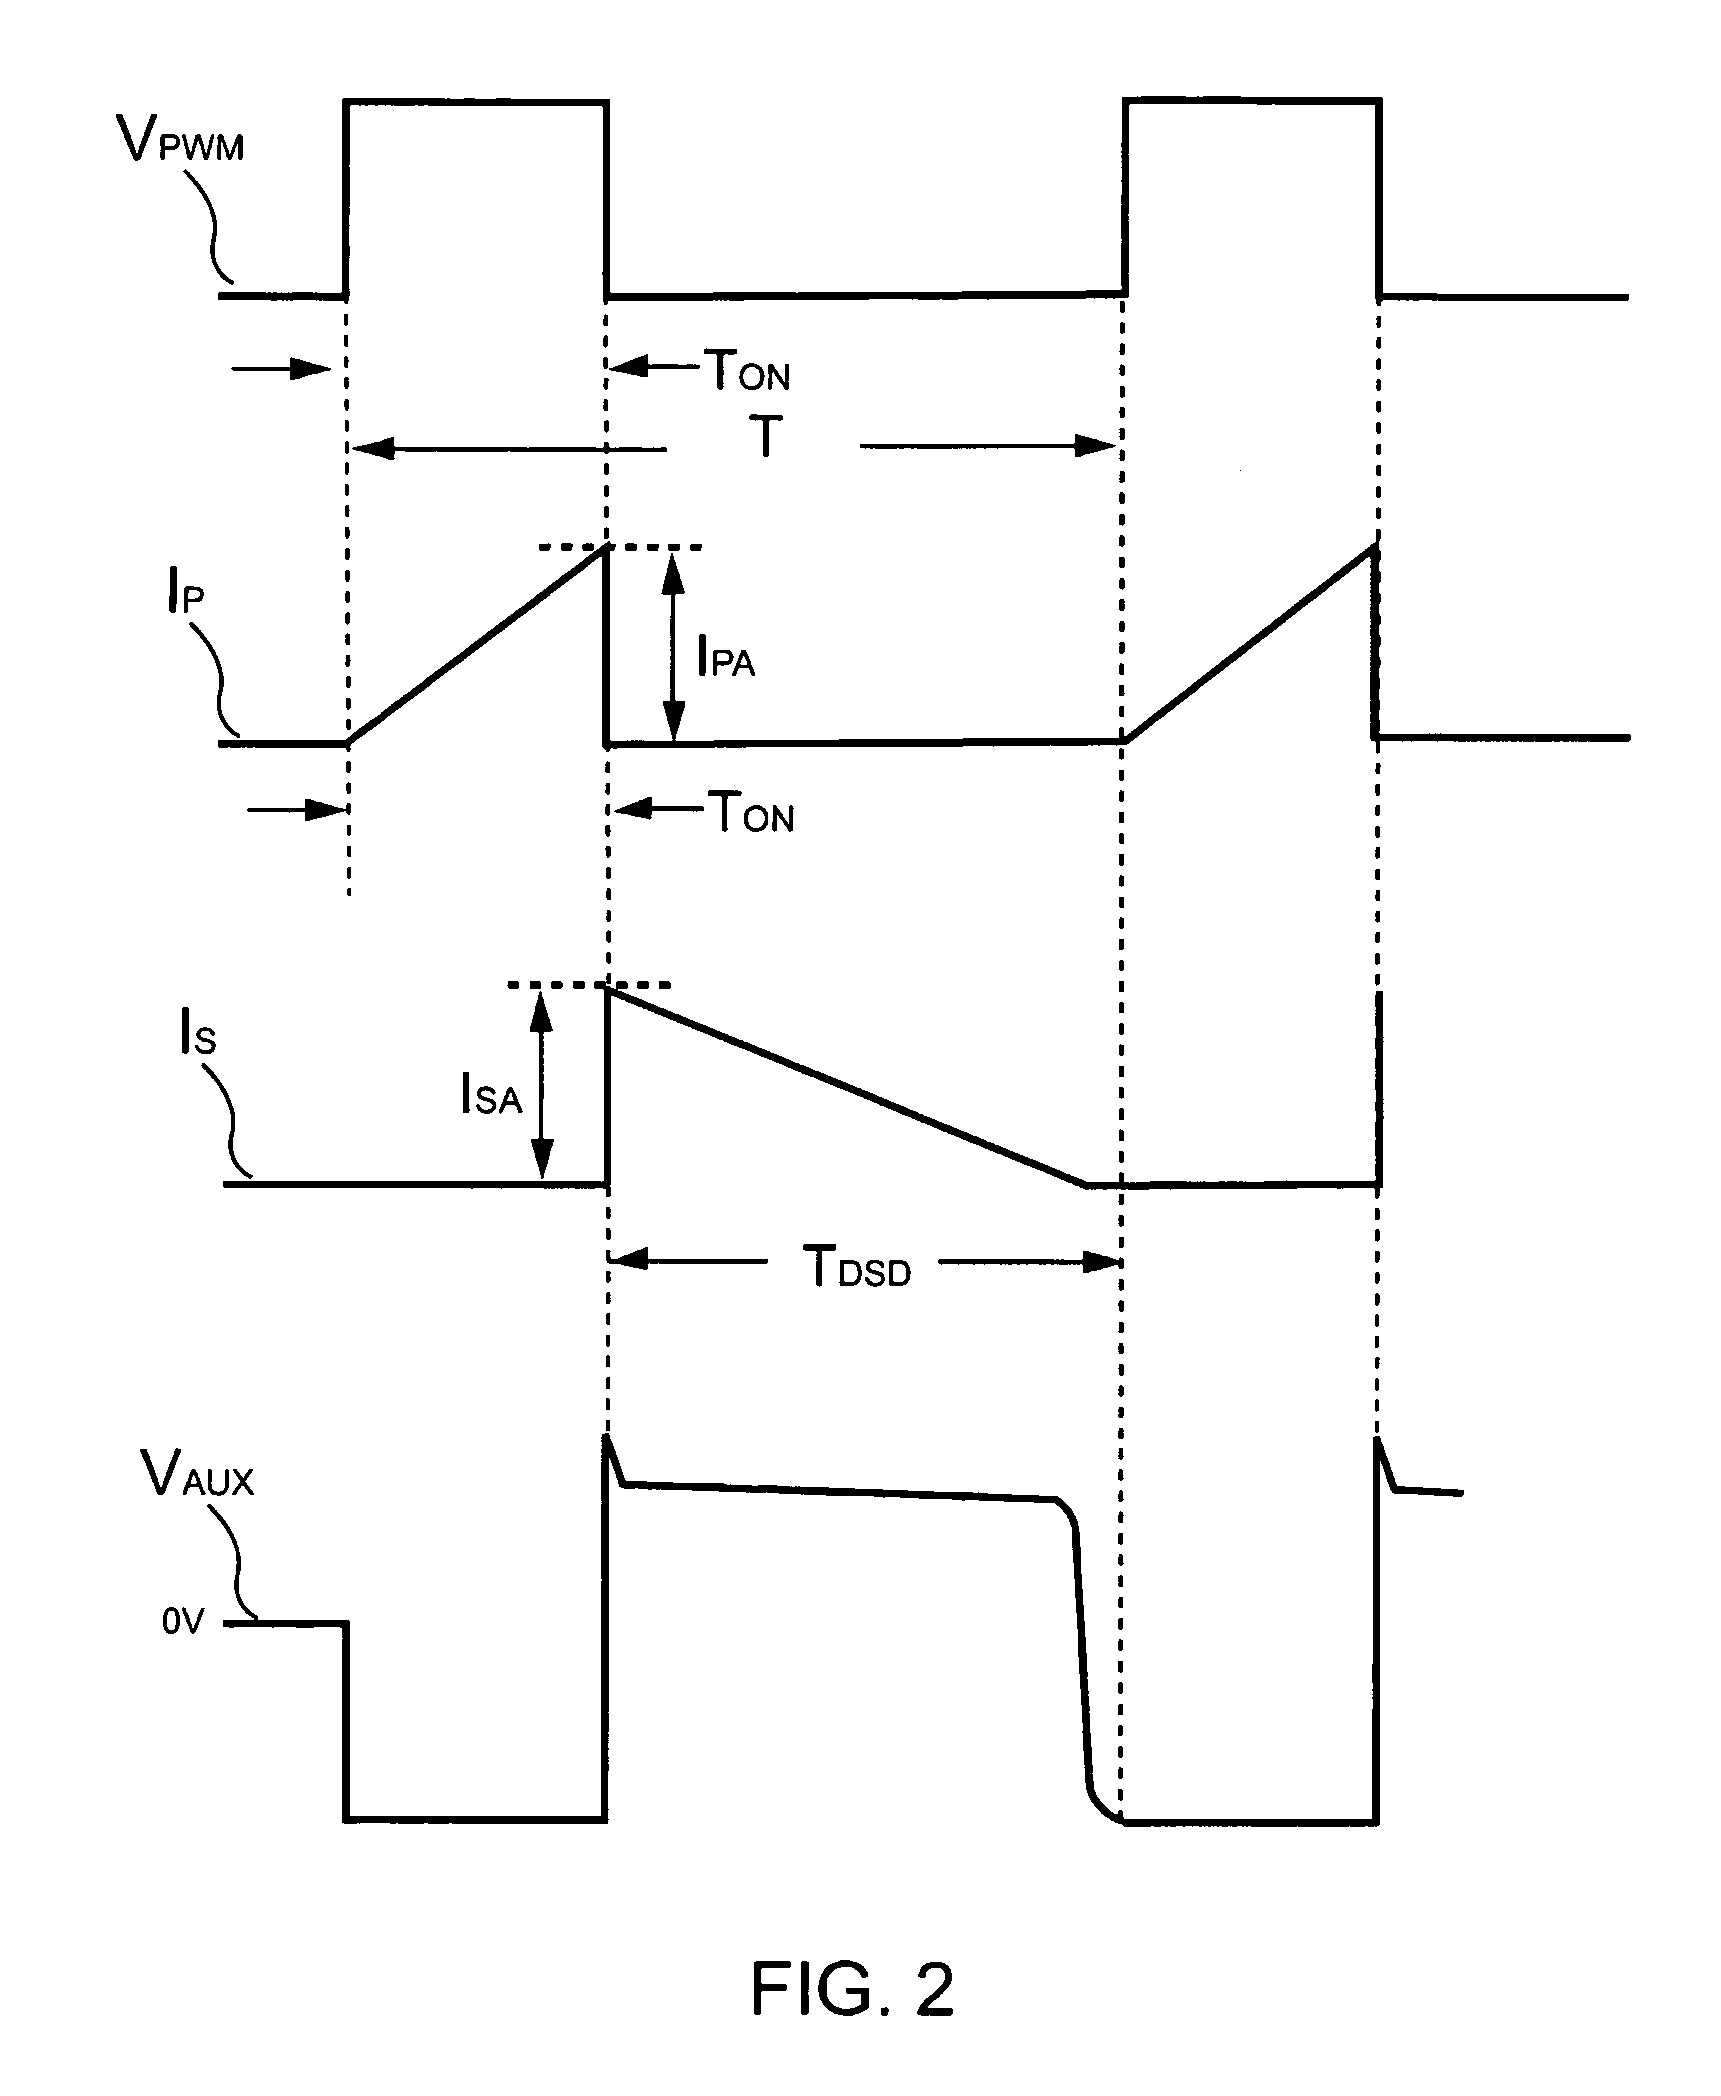 Controller having output current control for a power converter